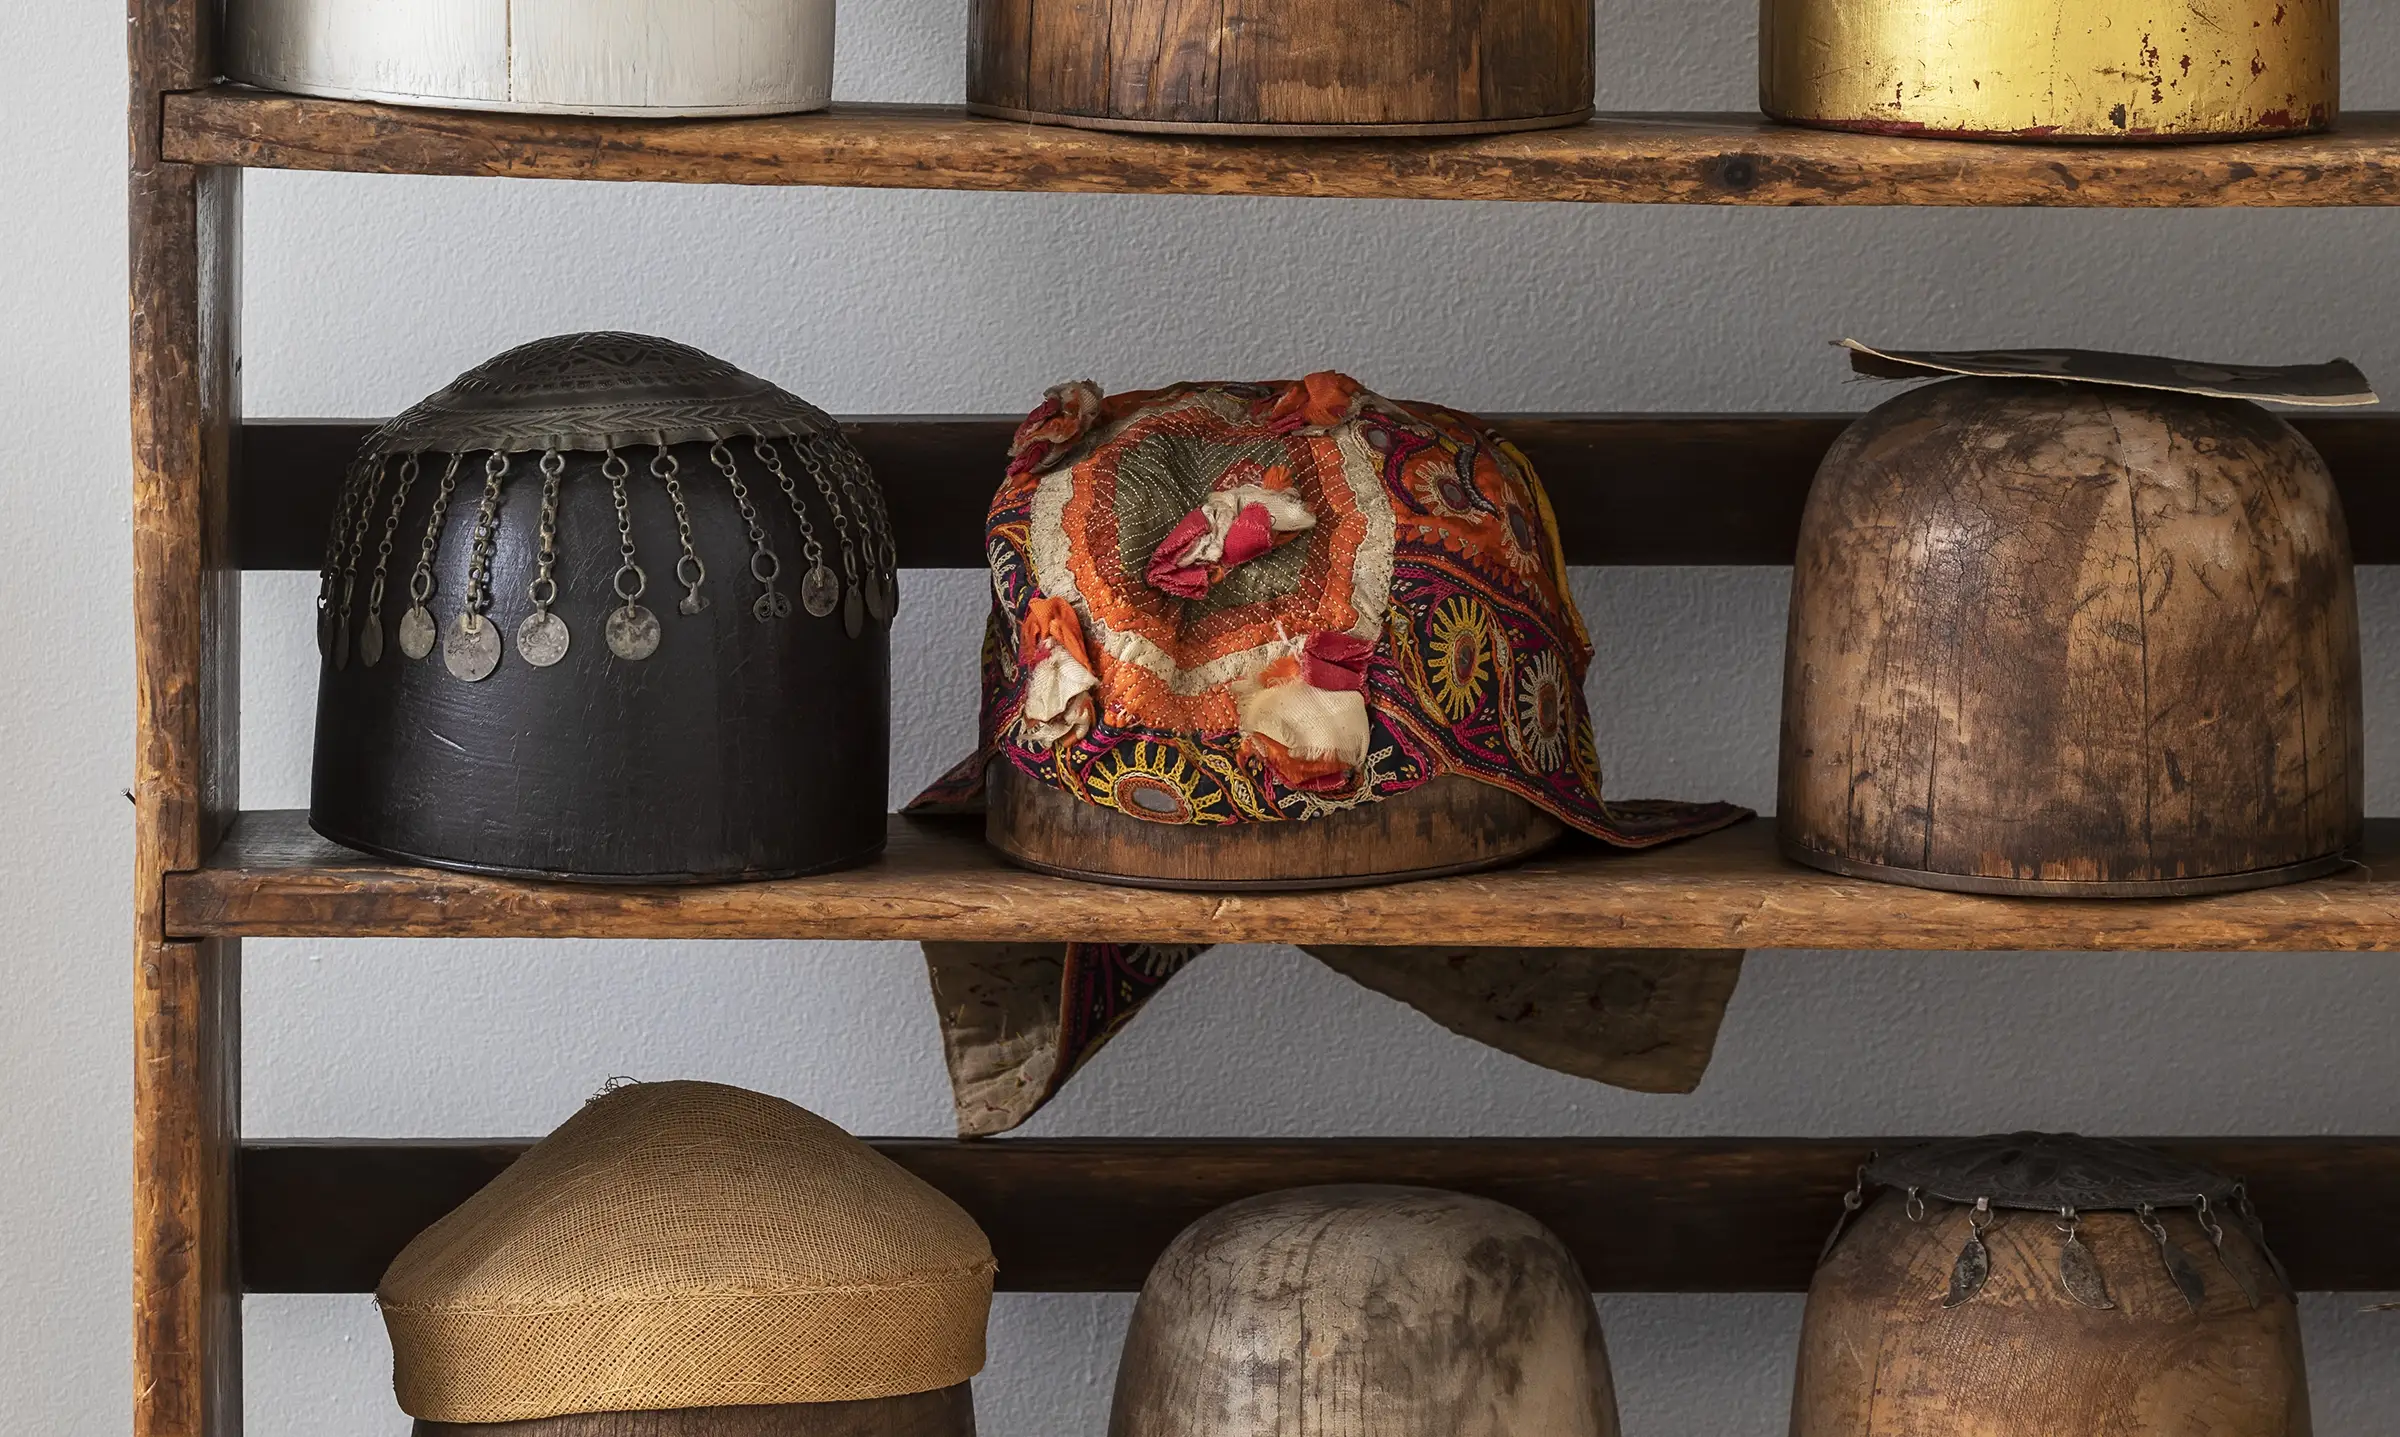 Shelf of head forms for different hats and headwear.